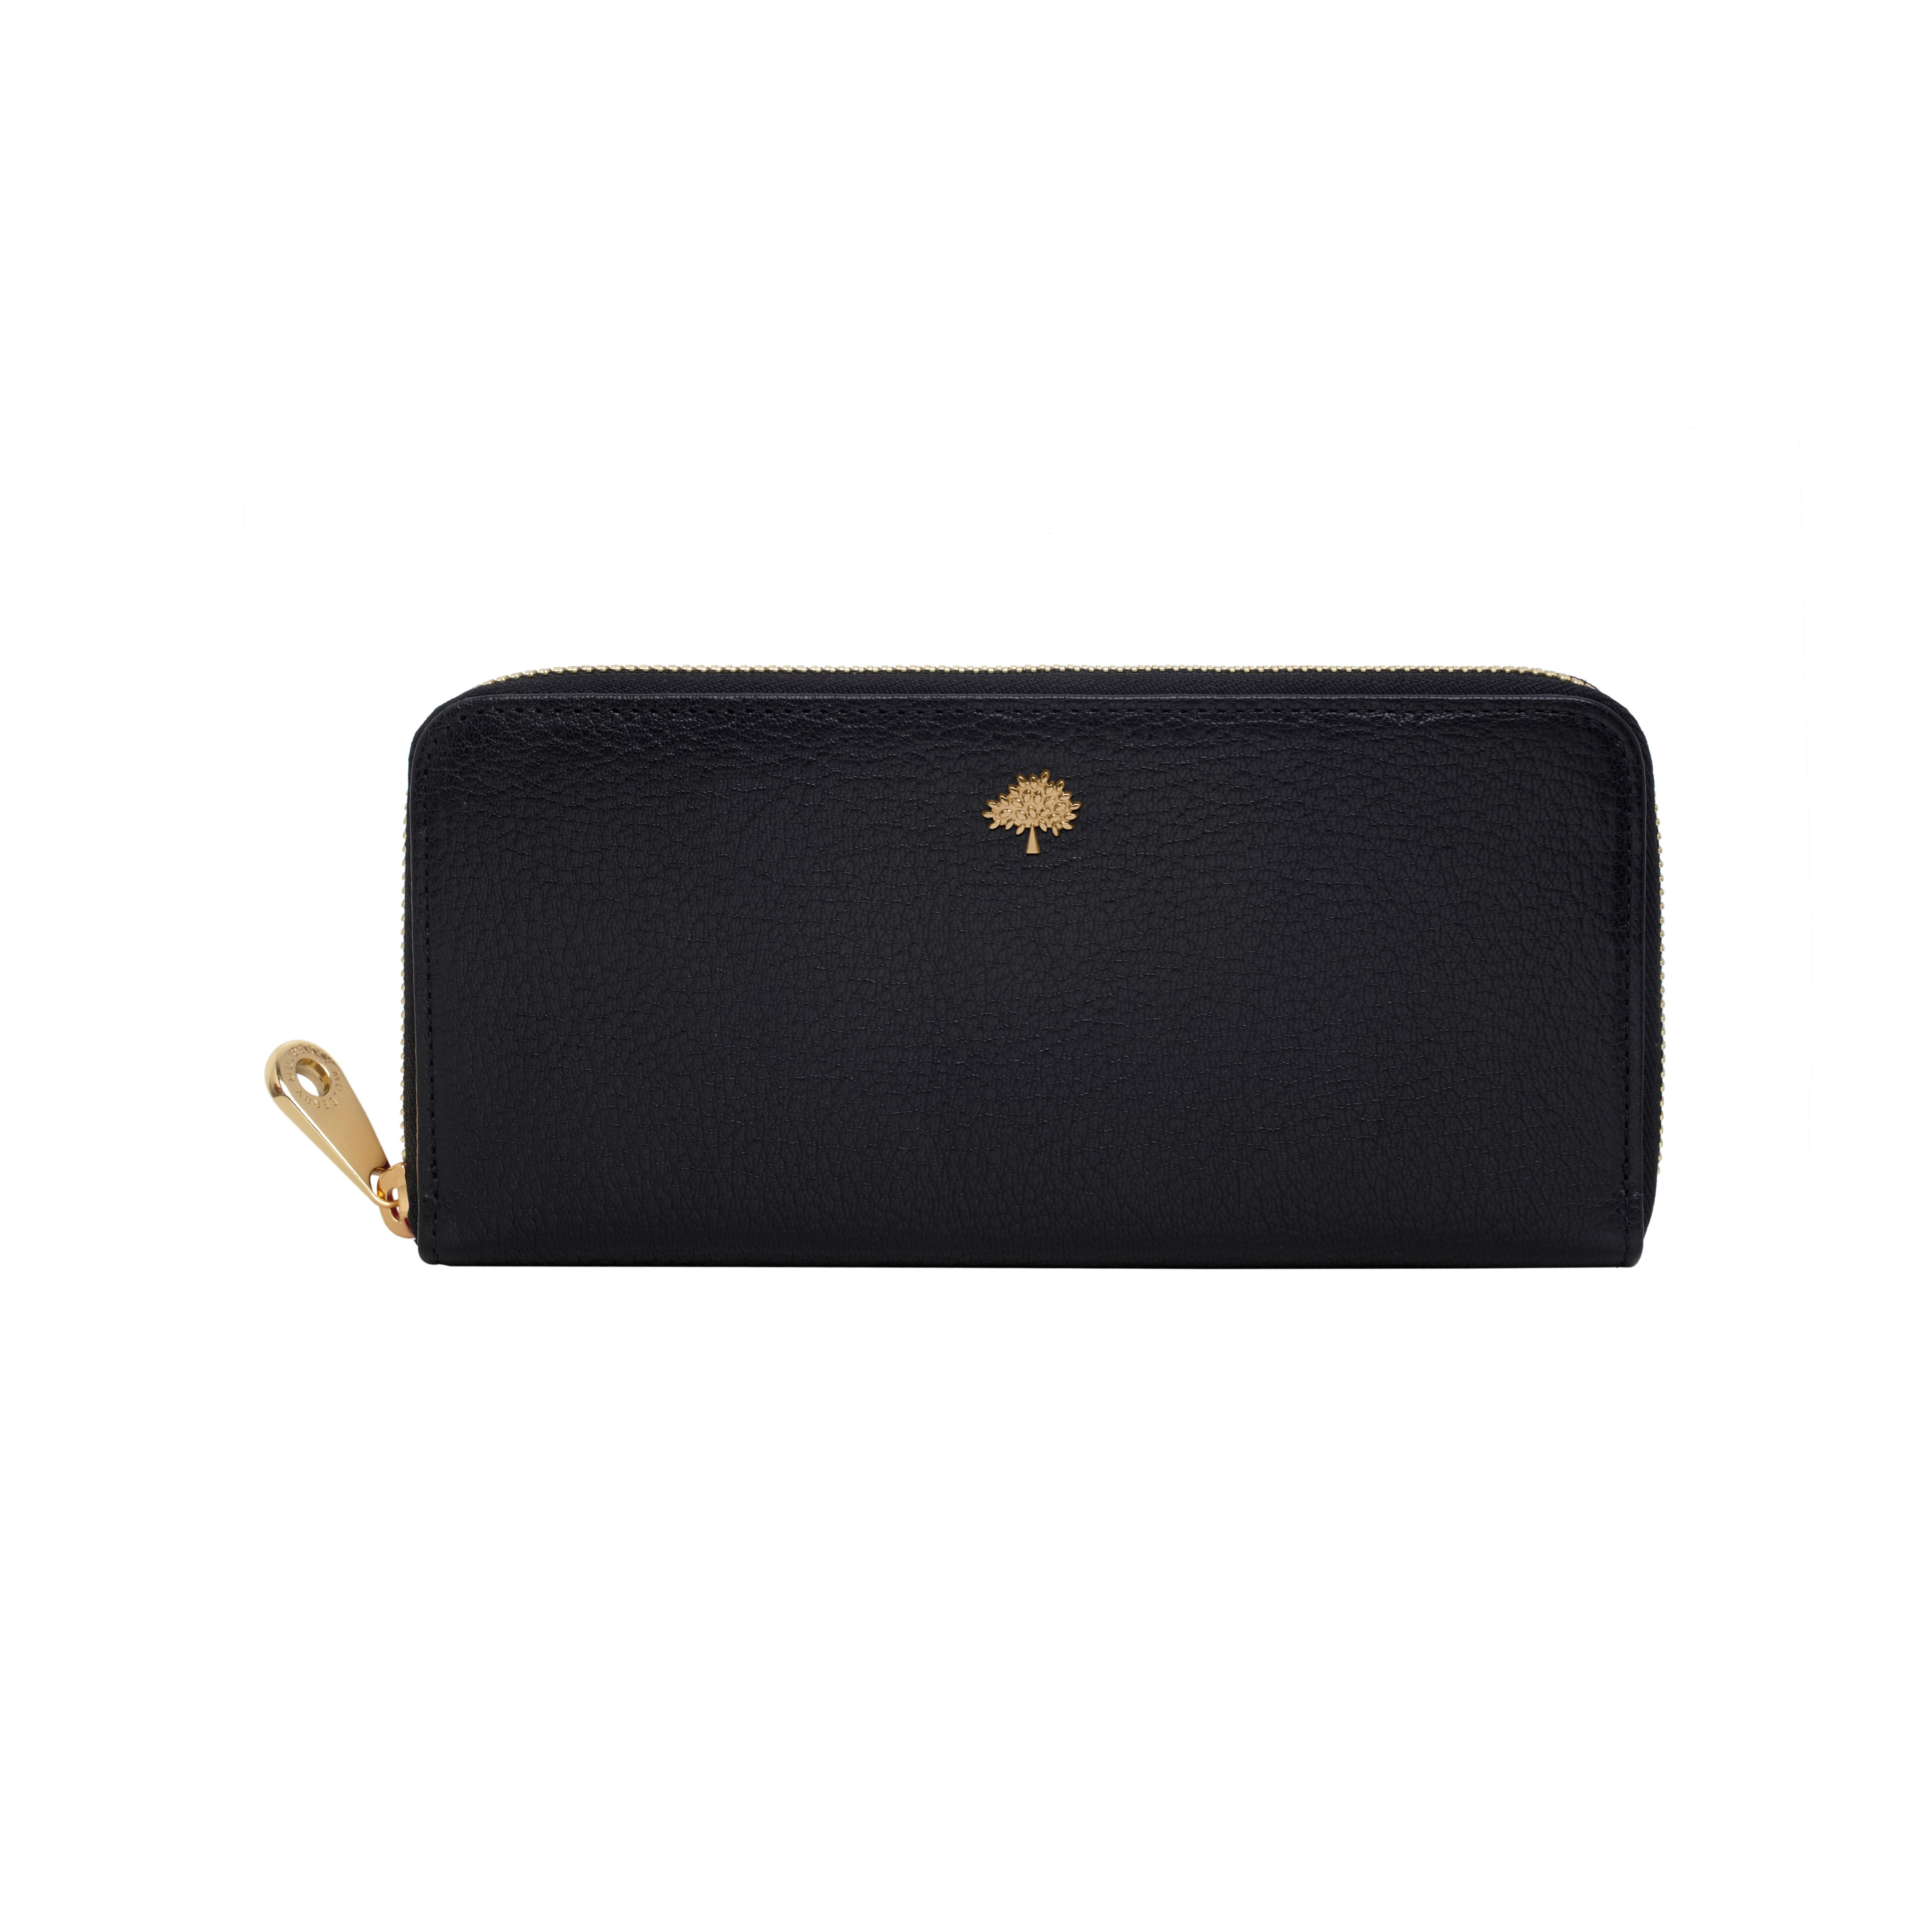 Mulberry Tree Zip-Around Leather Wallet in Black - Lyst